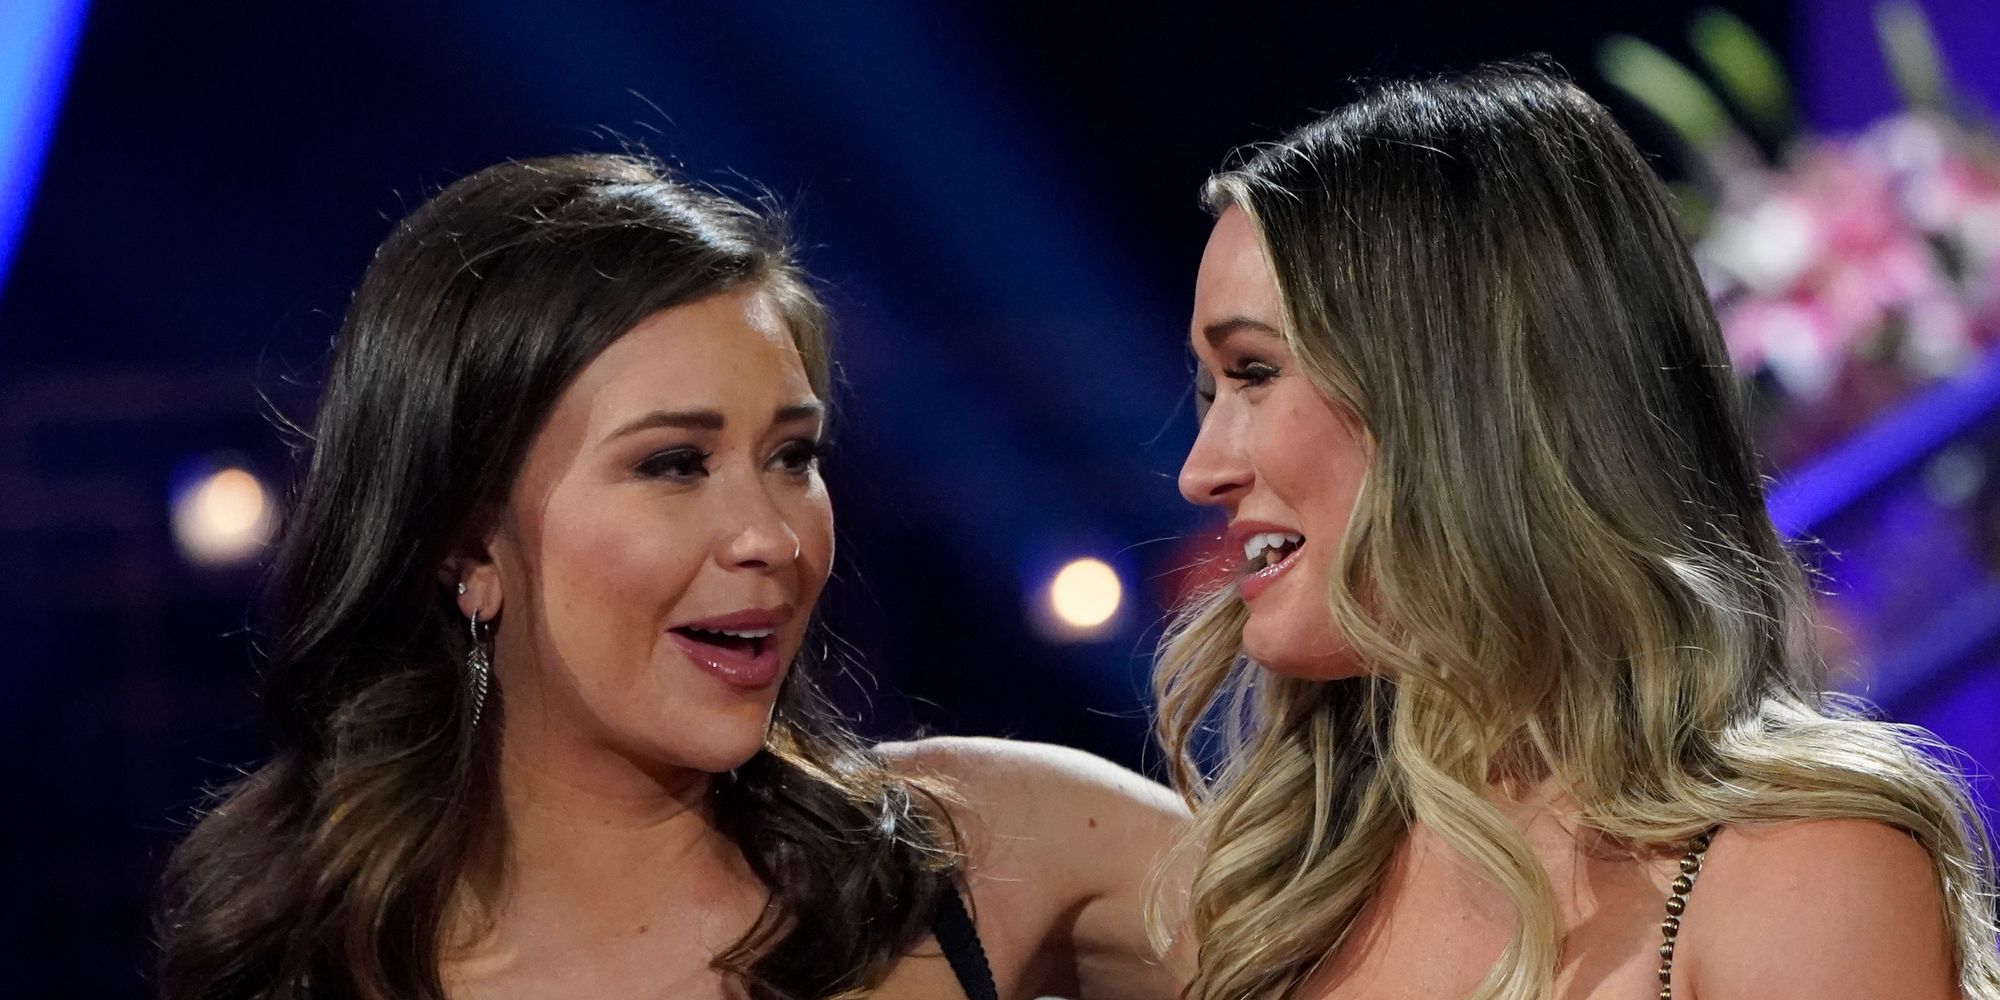 Gabby Windey and Rachel Recchia on The Bachelor season 26 finale smiling at each other